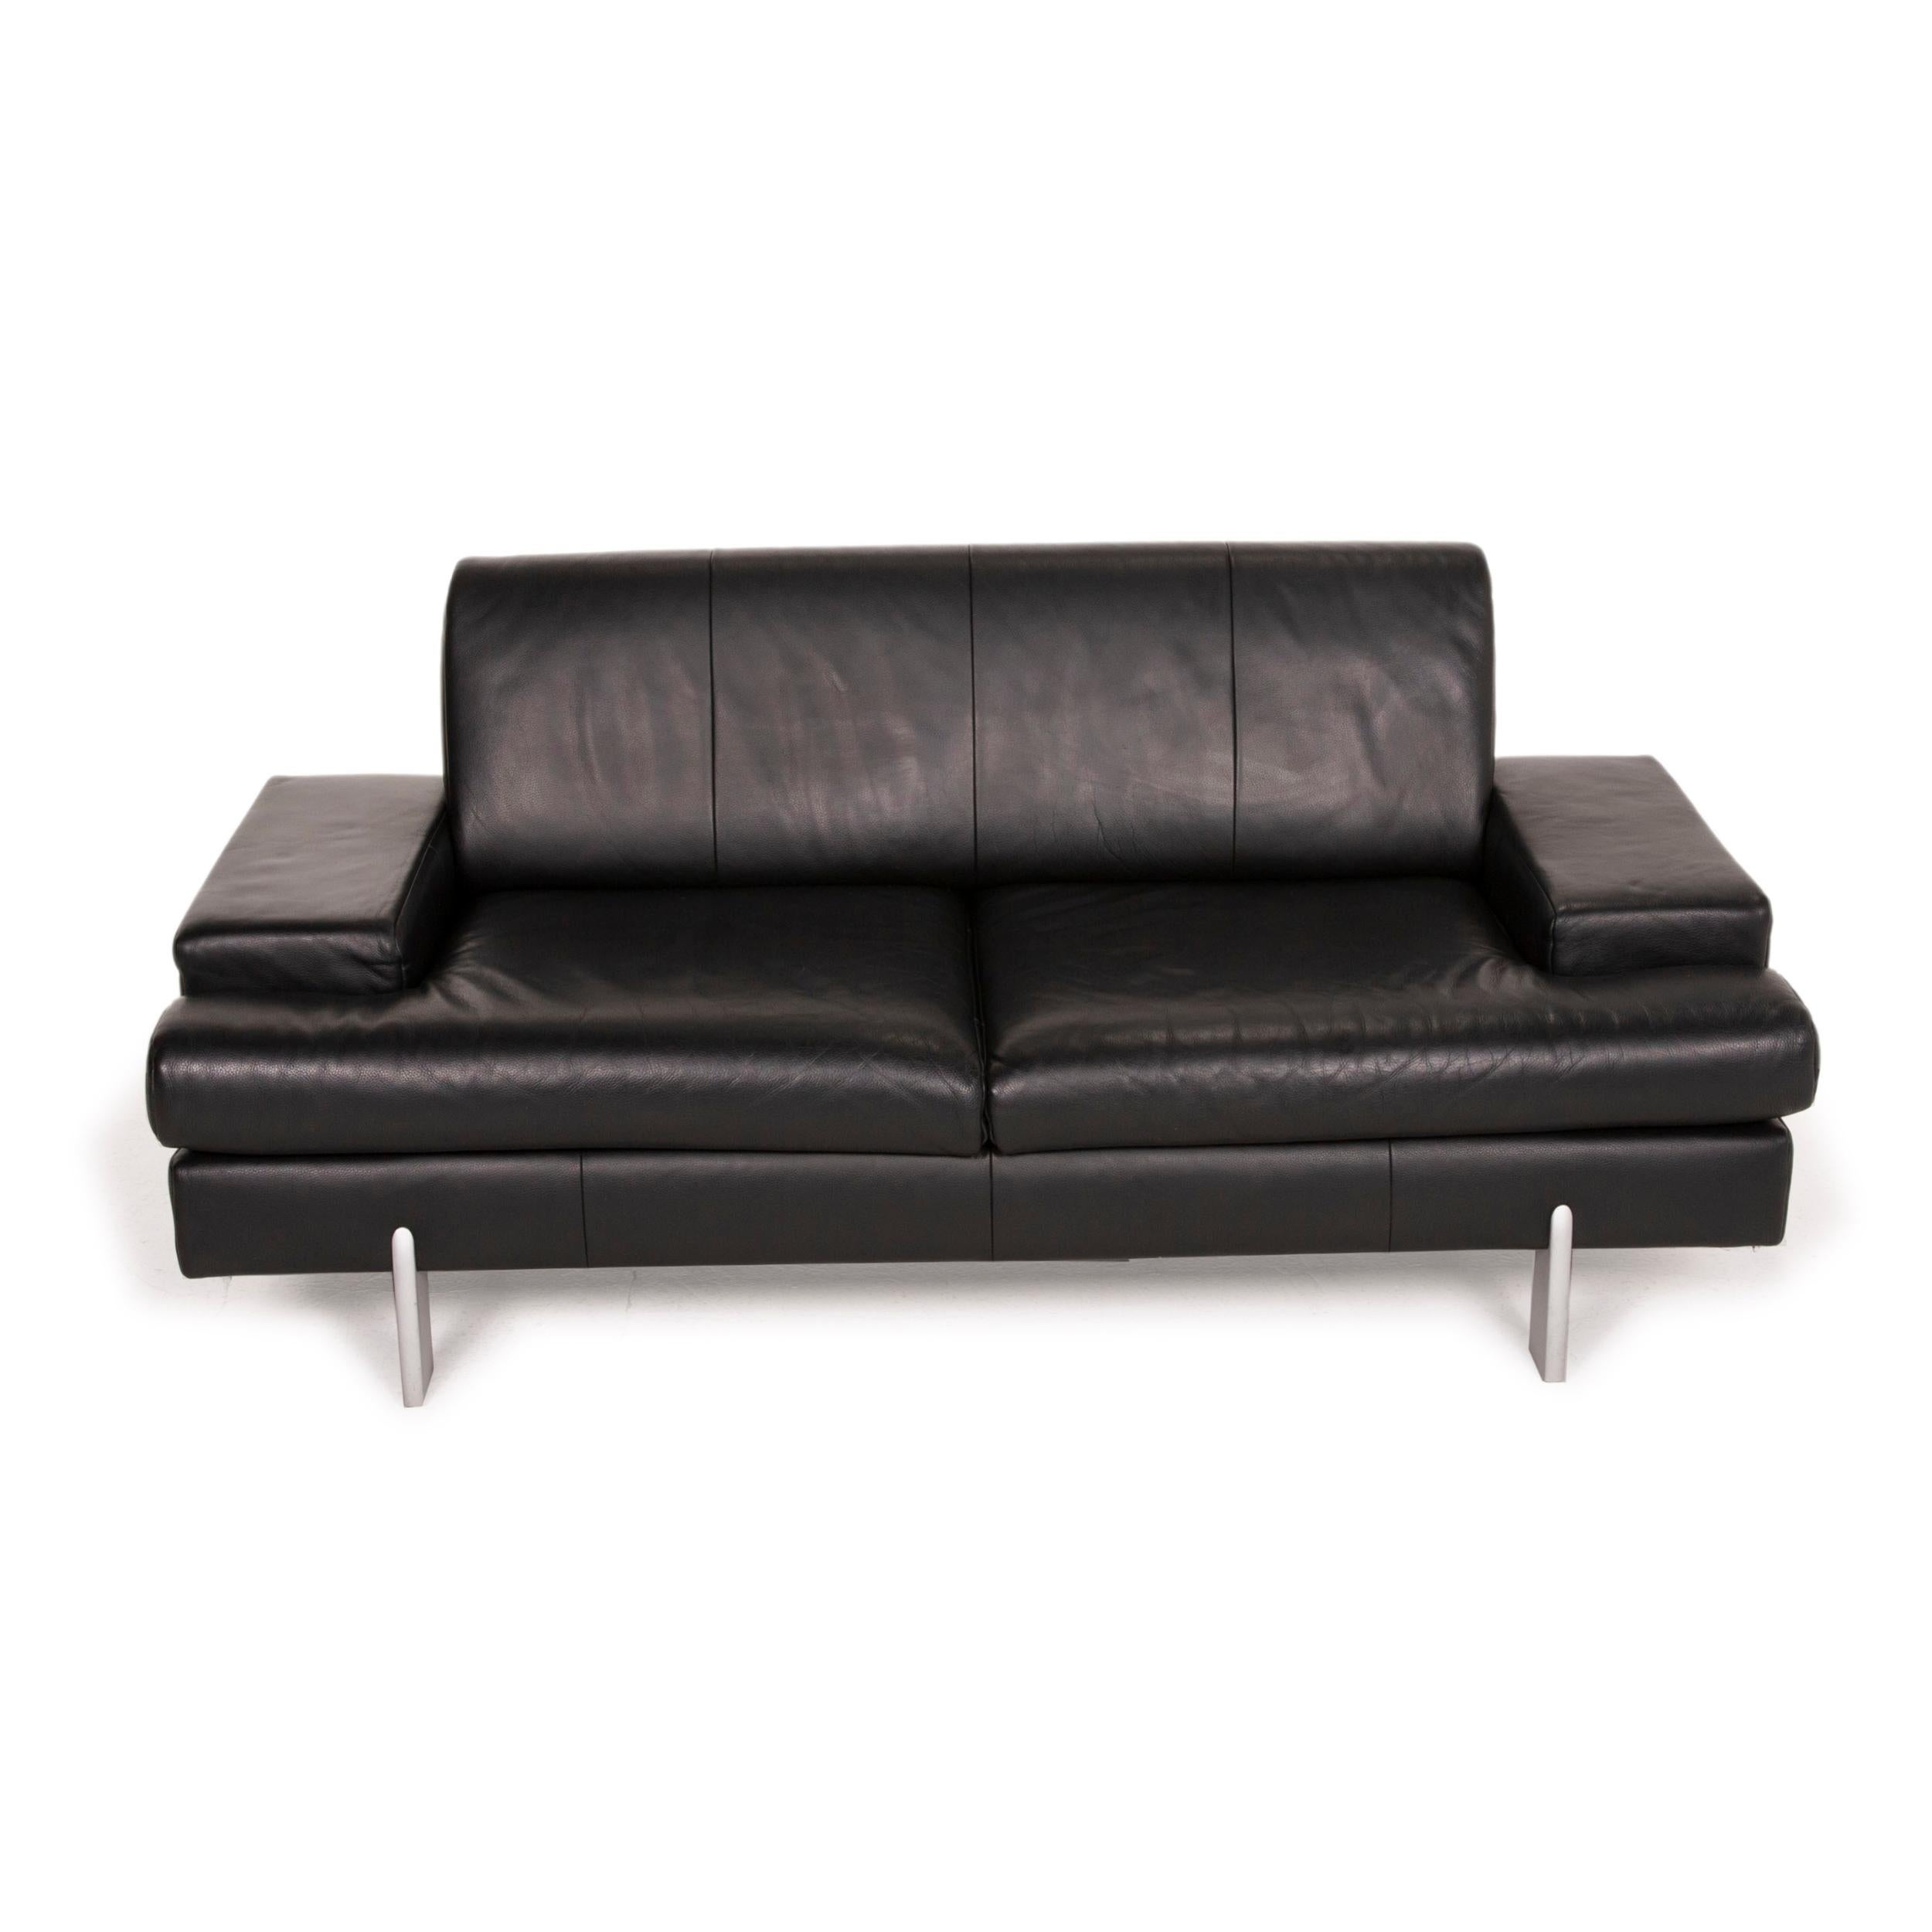 Rolf Benz Ak 644 Leather Sofa Black Two-Seater Couch 1